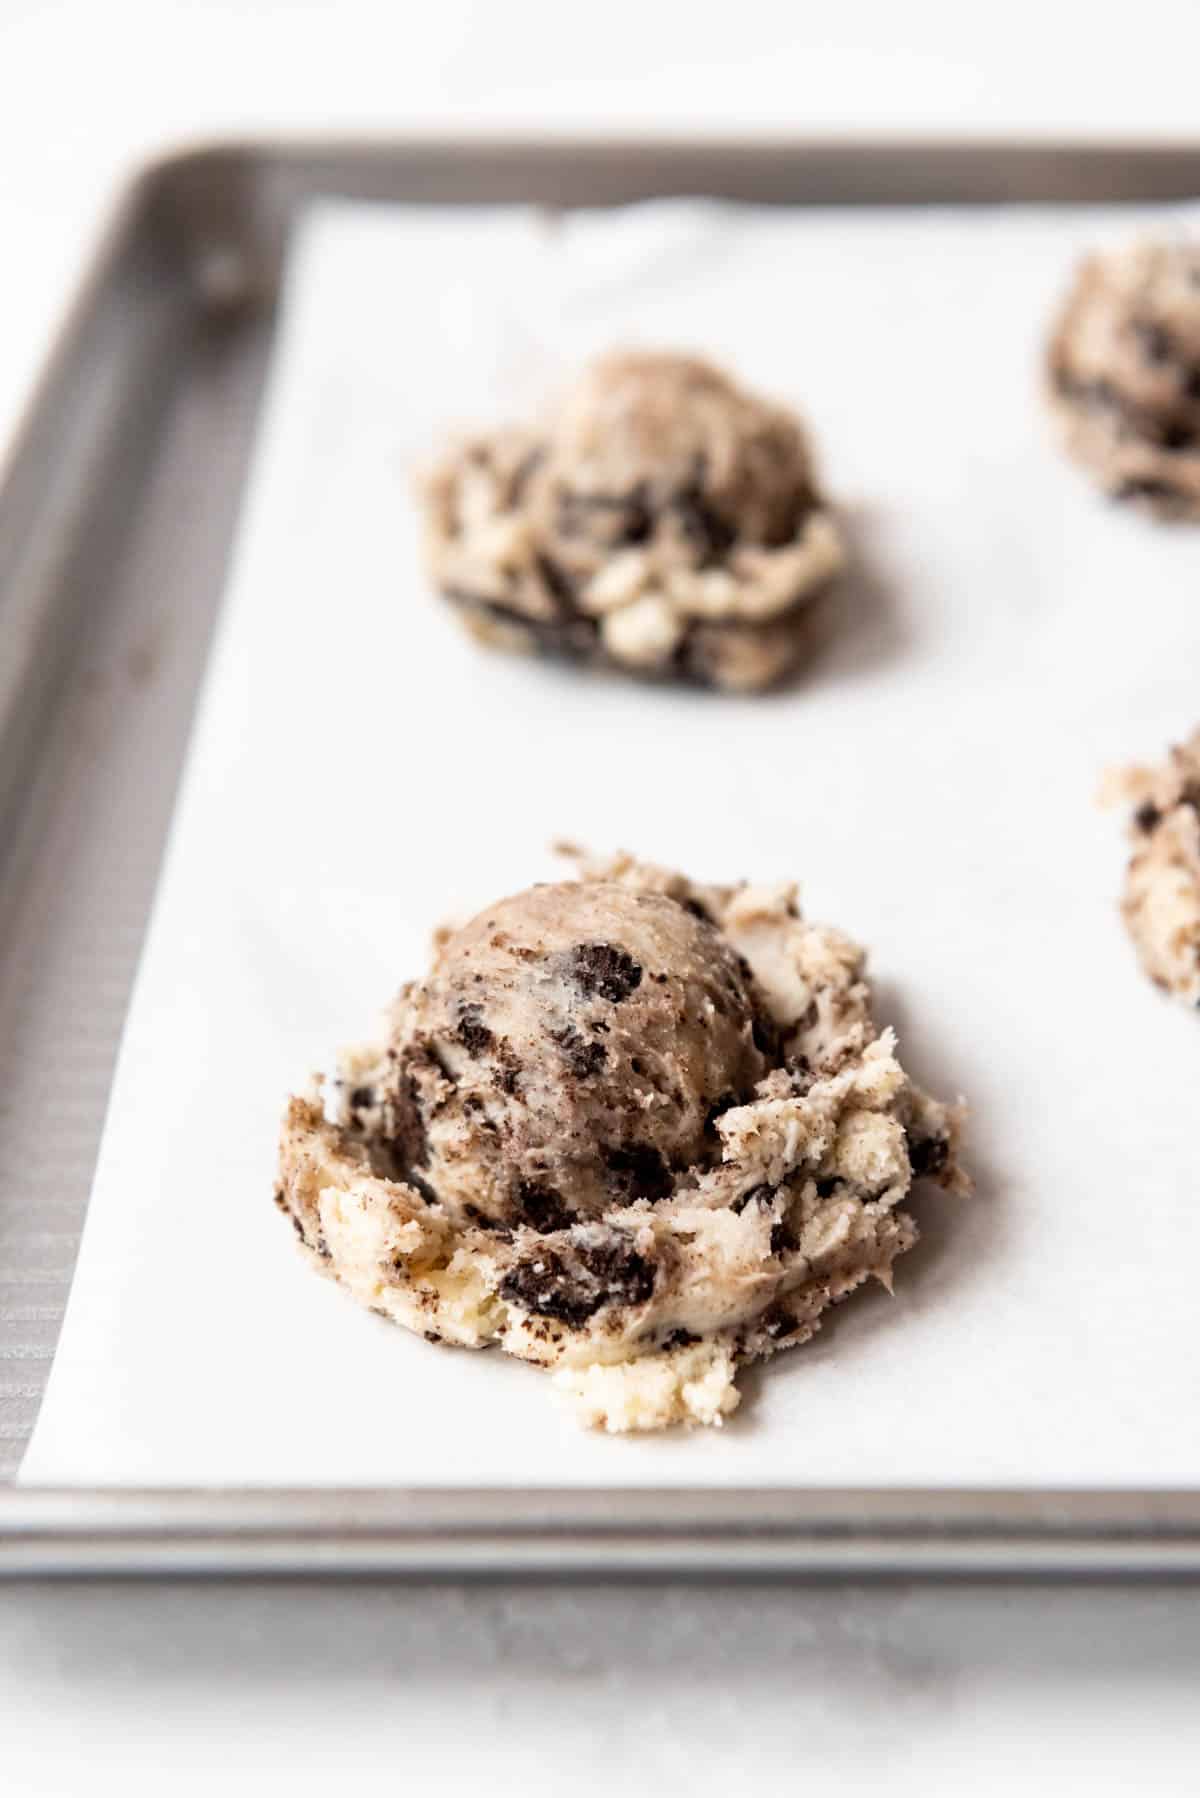 Oreo cheesecake cookie dough scooped onto a baking sheet lined with parchment paper.